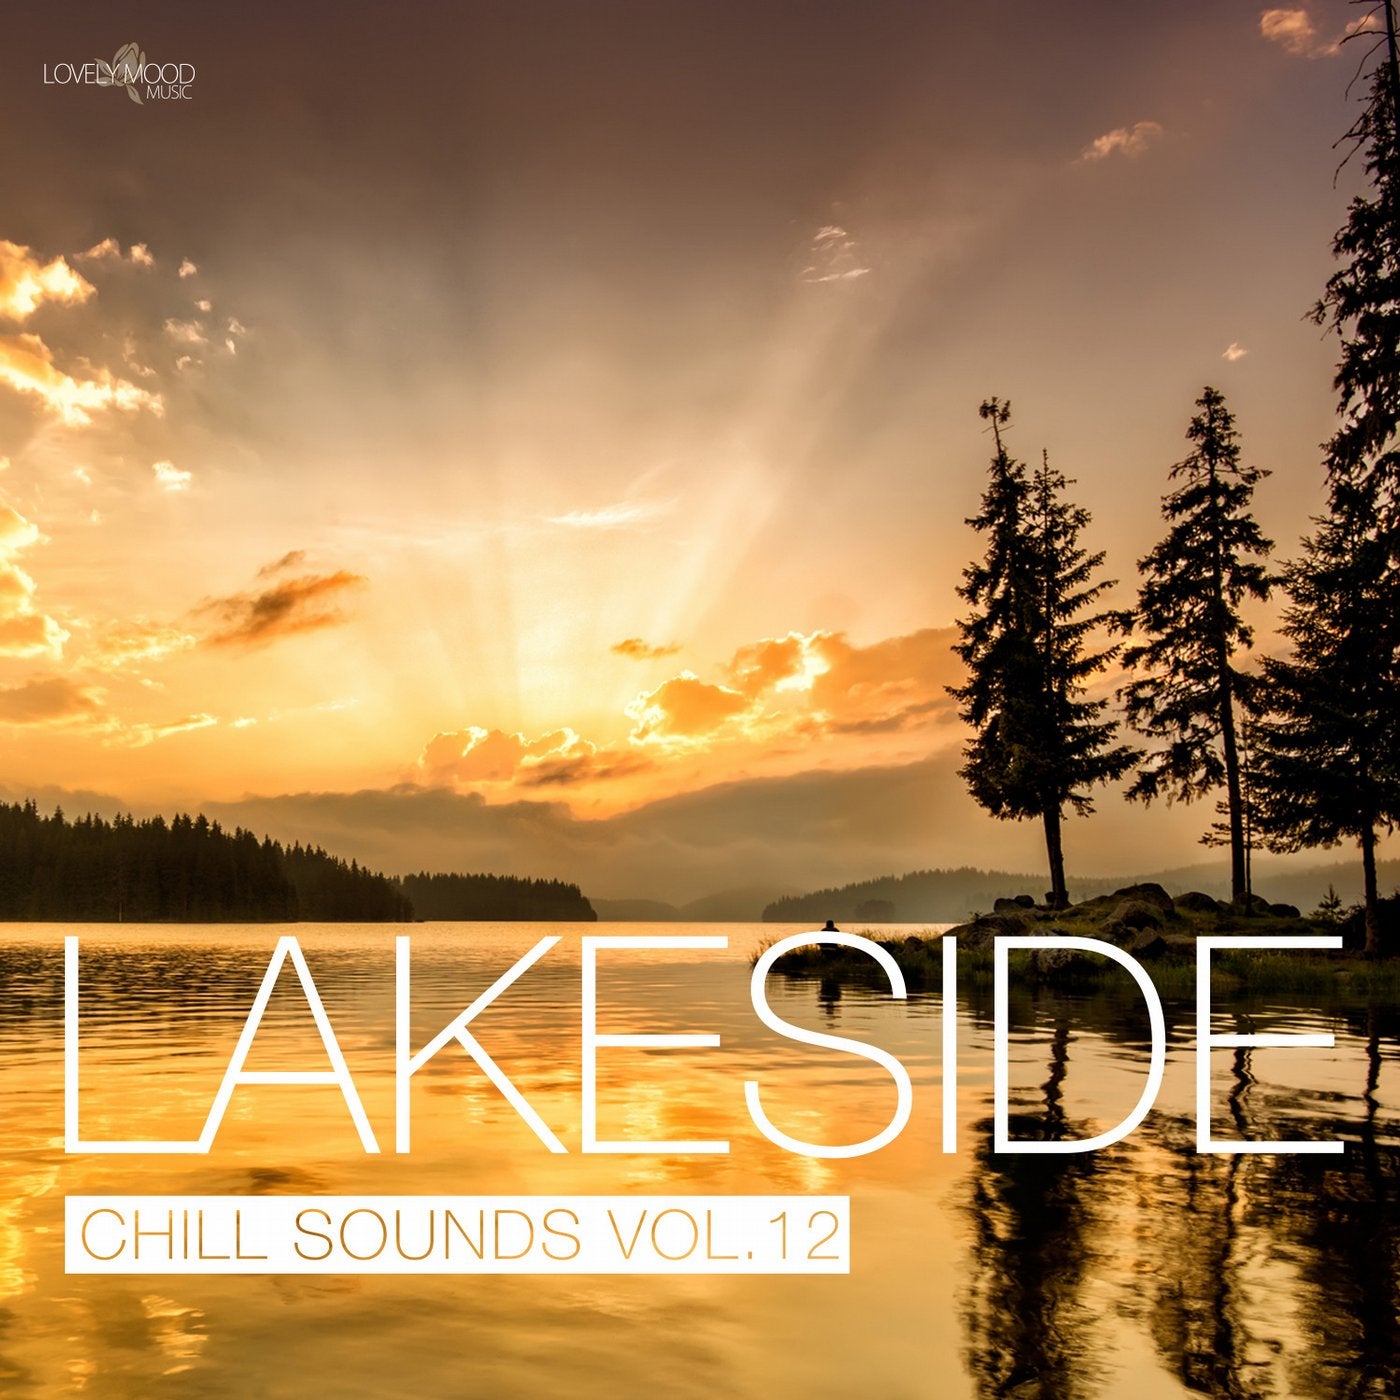 Lakeside Chill Sounds Vol. 12